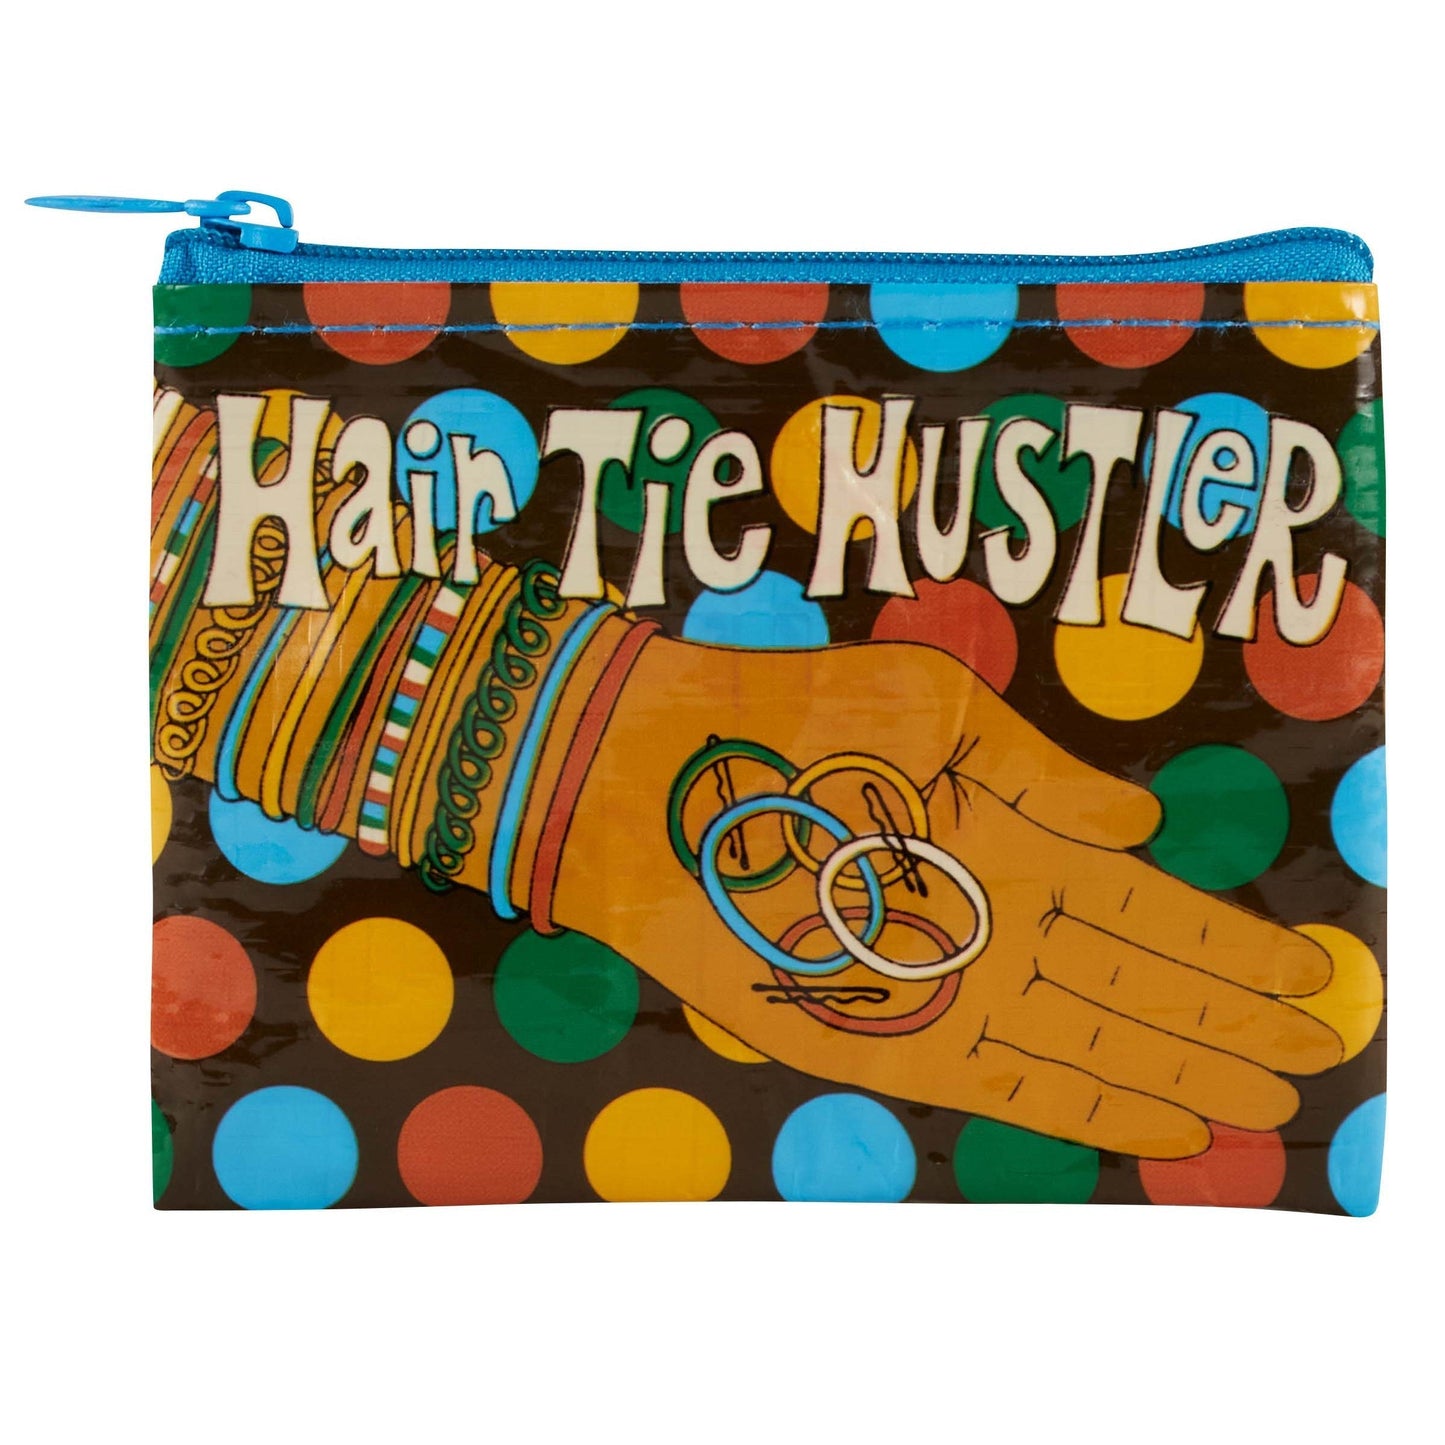 Hair Tie Hustler Coin Purse | Recycled Material Wallet Pouch | 3" x 4"